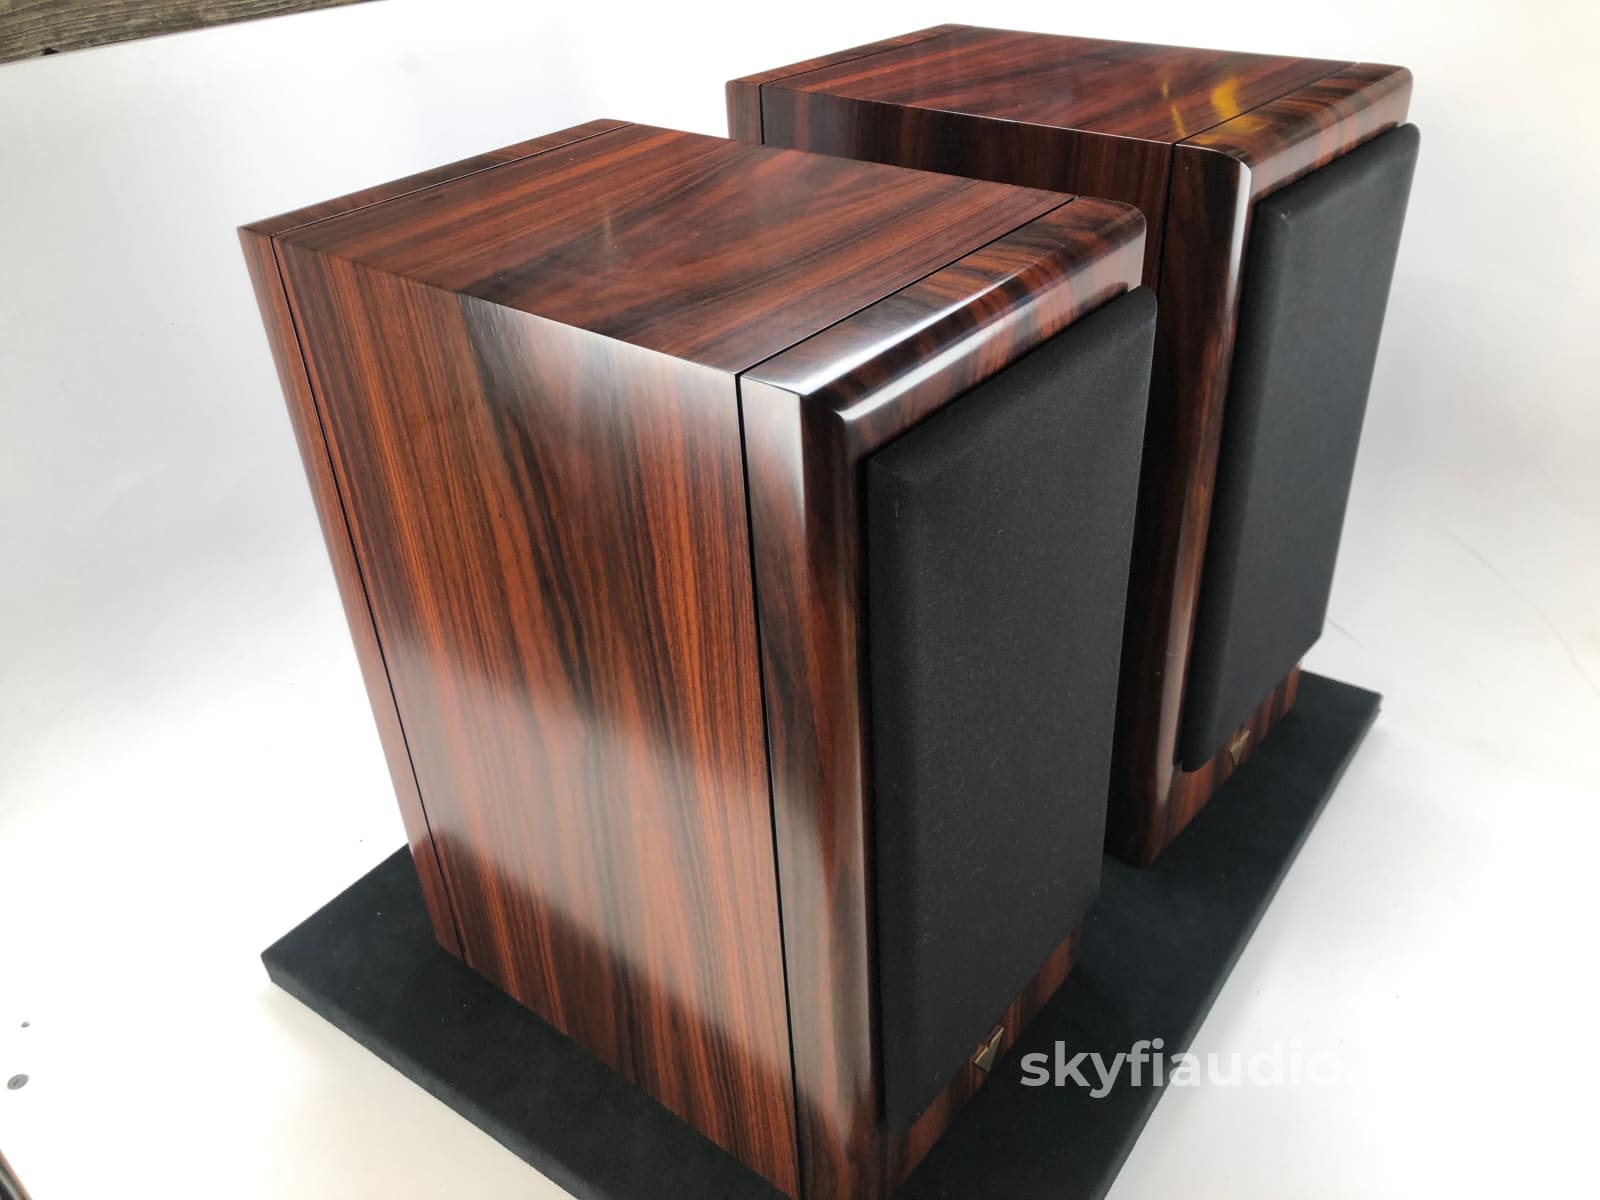 Vienna Acoustics Haydn Speakers - In A Spectacular Finish